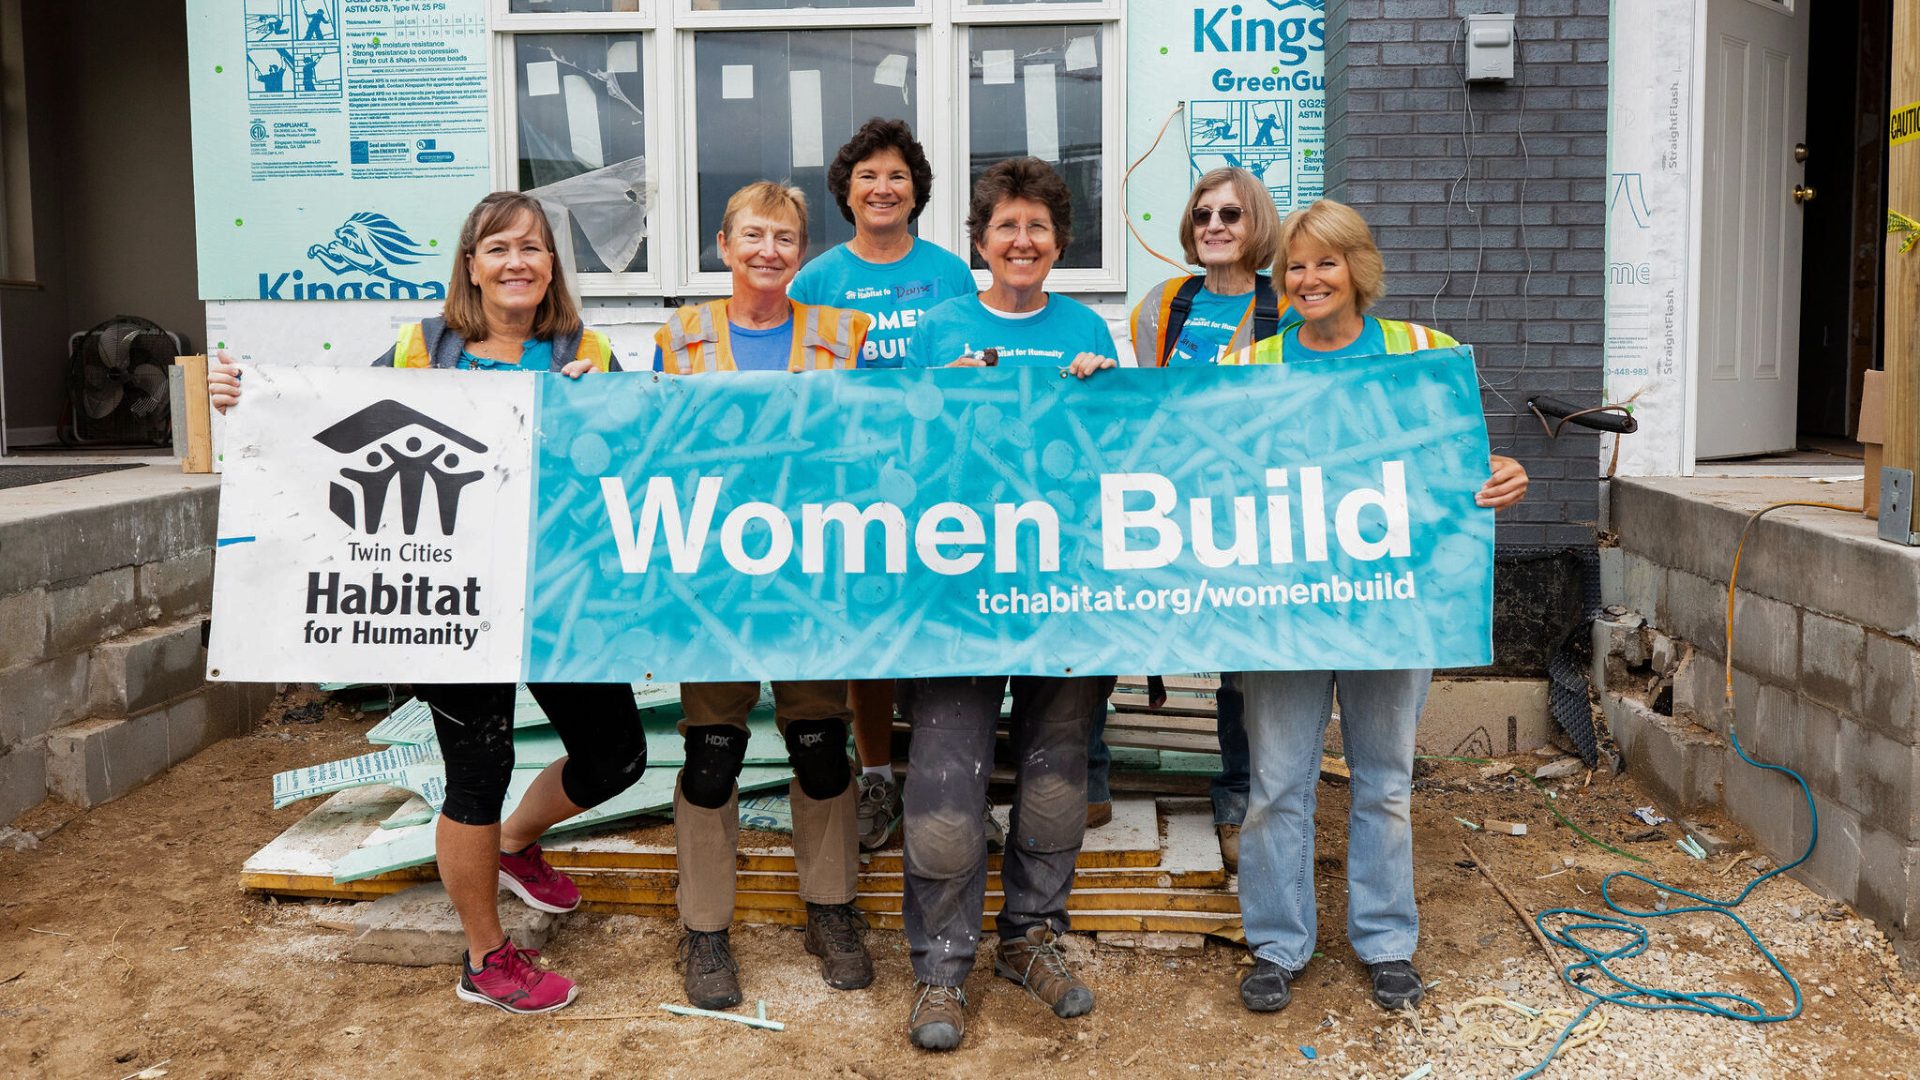 Women Build group smiling and holding banner.